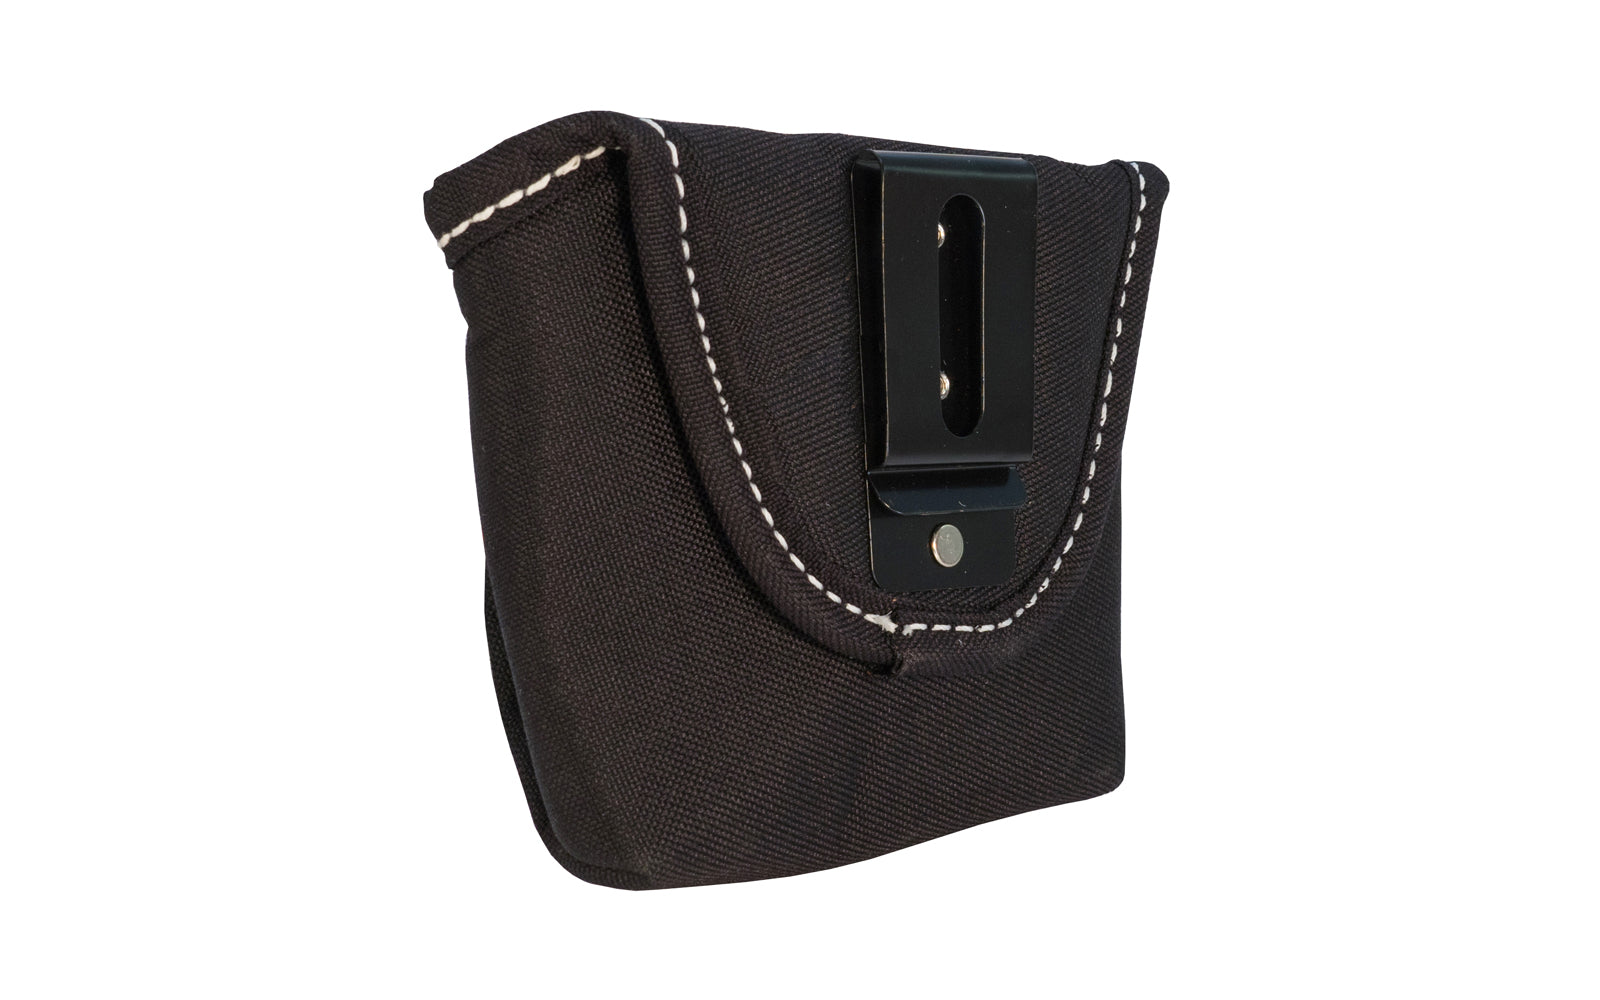 Occidental Leather Clip-On Pouch - Model 9501 ~ This bag by Occidental Leather is a cost efficient fastener & tool management clip-on pouch. pouch bag. Perfect for small jobs or the do it yourself weekend projects. Made of Nylon material - 759244139709 - Small Clip On Pouch Bag